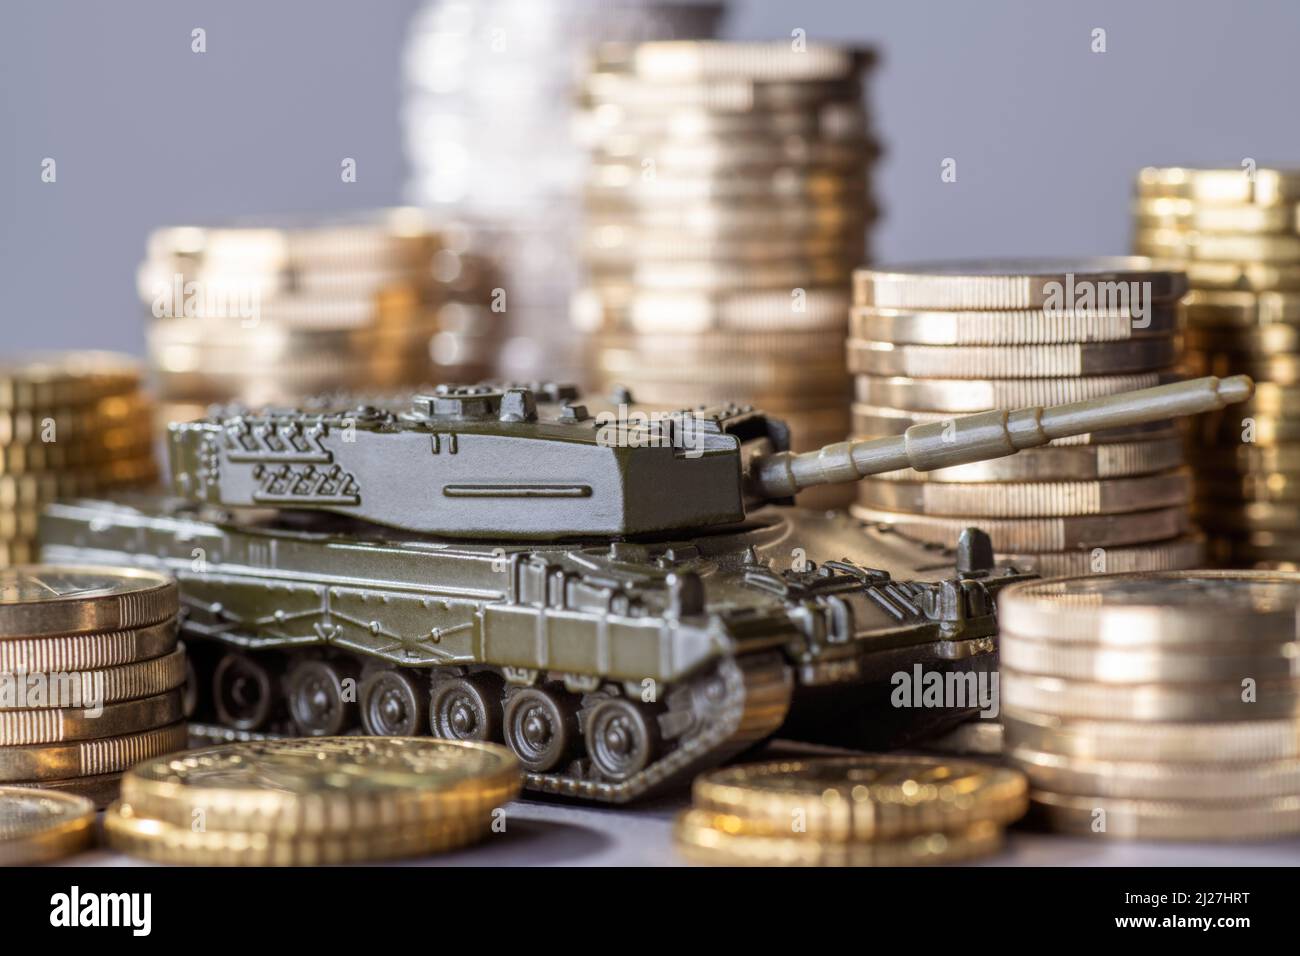 Tank between stacks of coins as a symbol of high armament expenditure Stock Photo